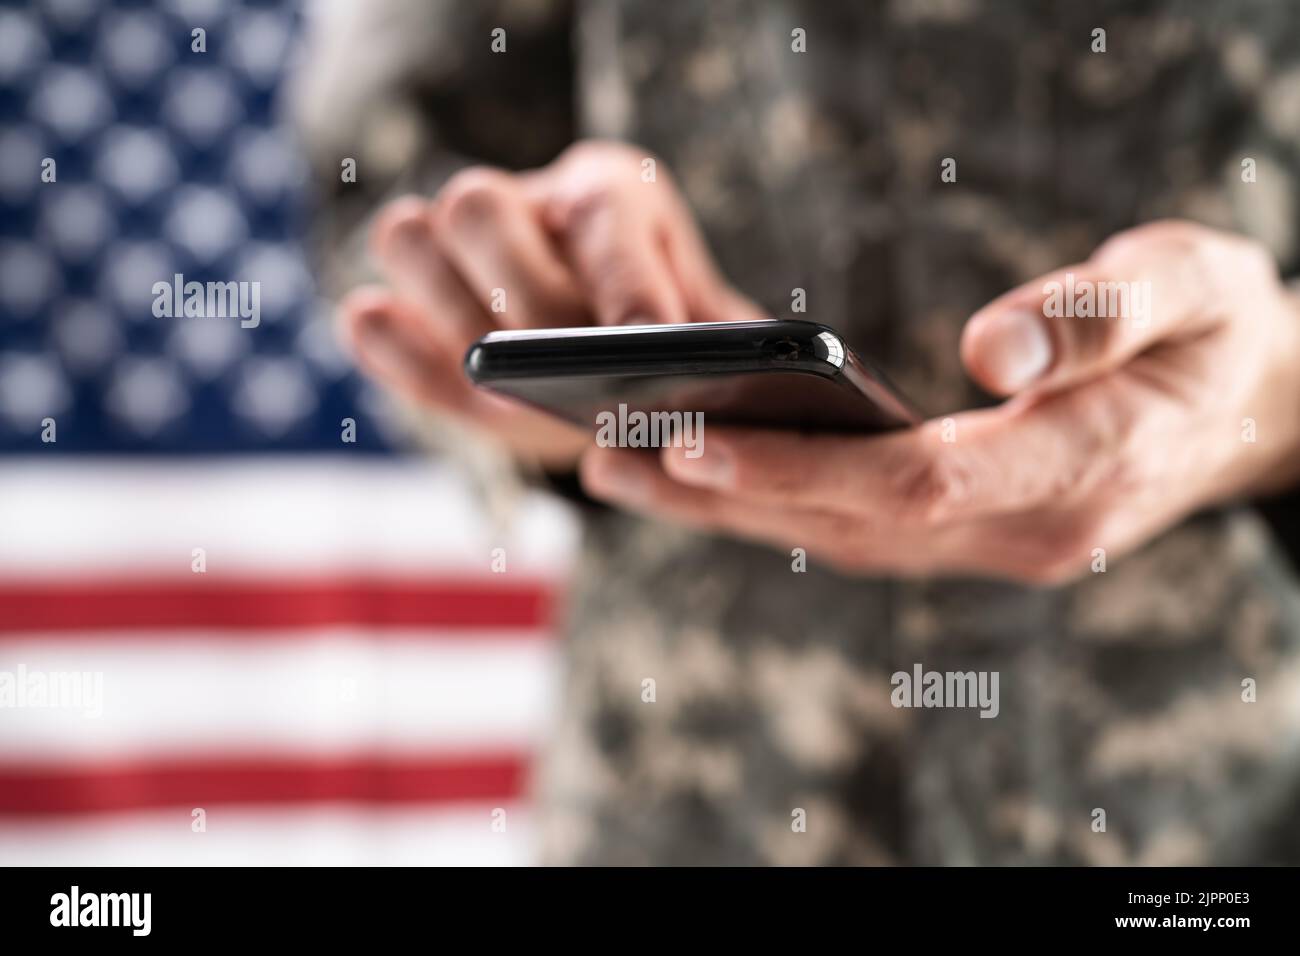 Soldier Holding Mobile Phone. Military War Espionage Stock Photo